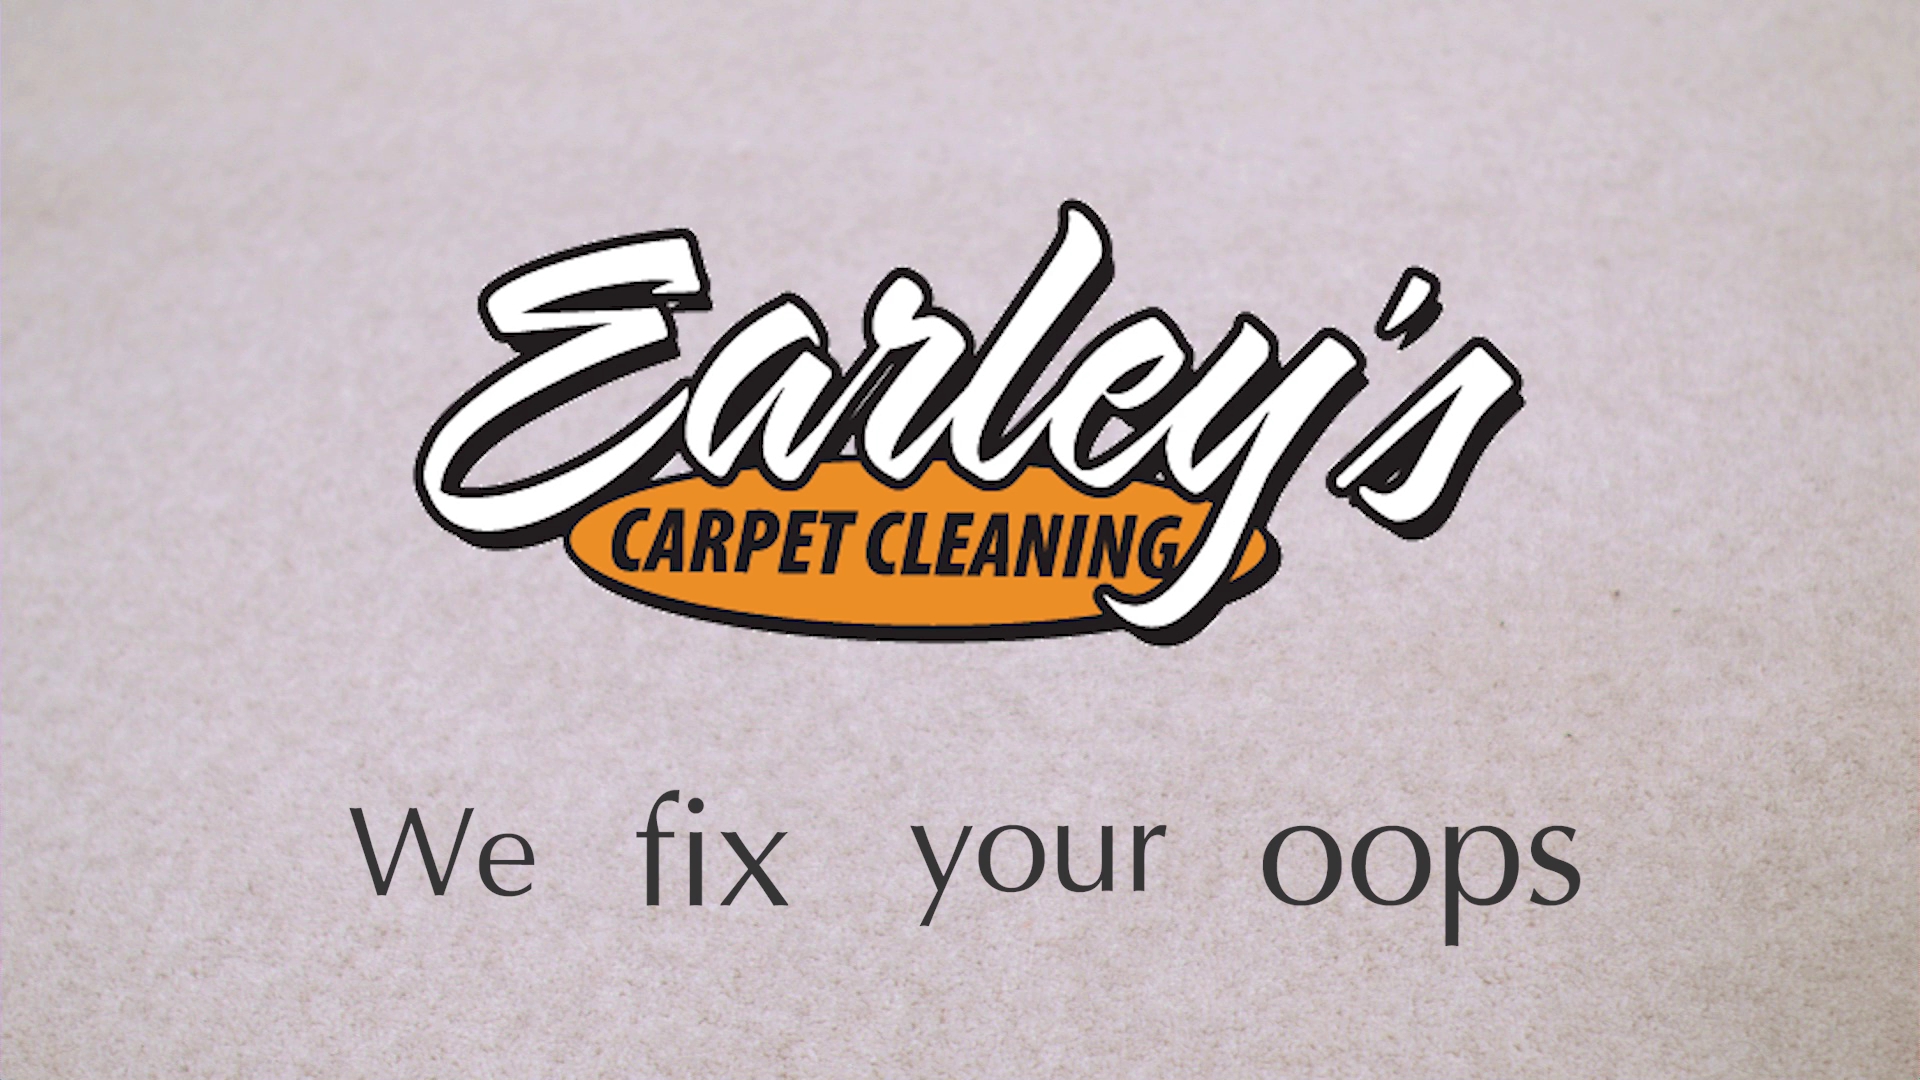 Earley's Carpet Cleaning